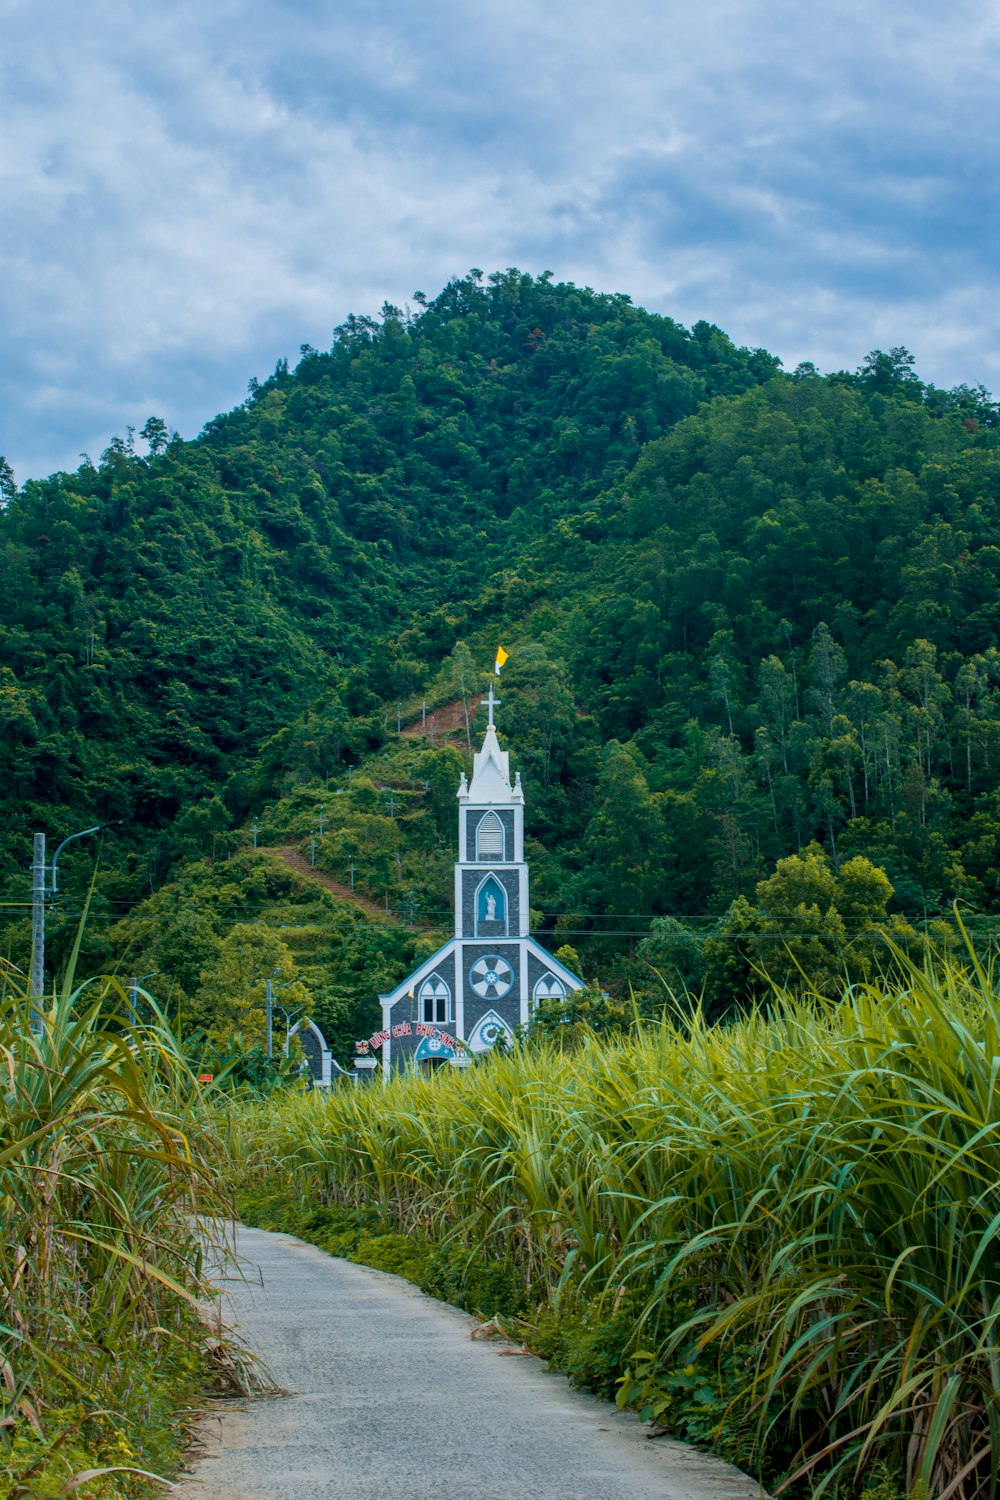 a church in the middle of a lush green forest